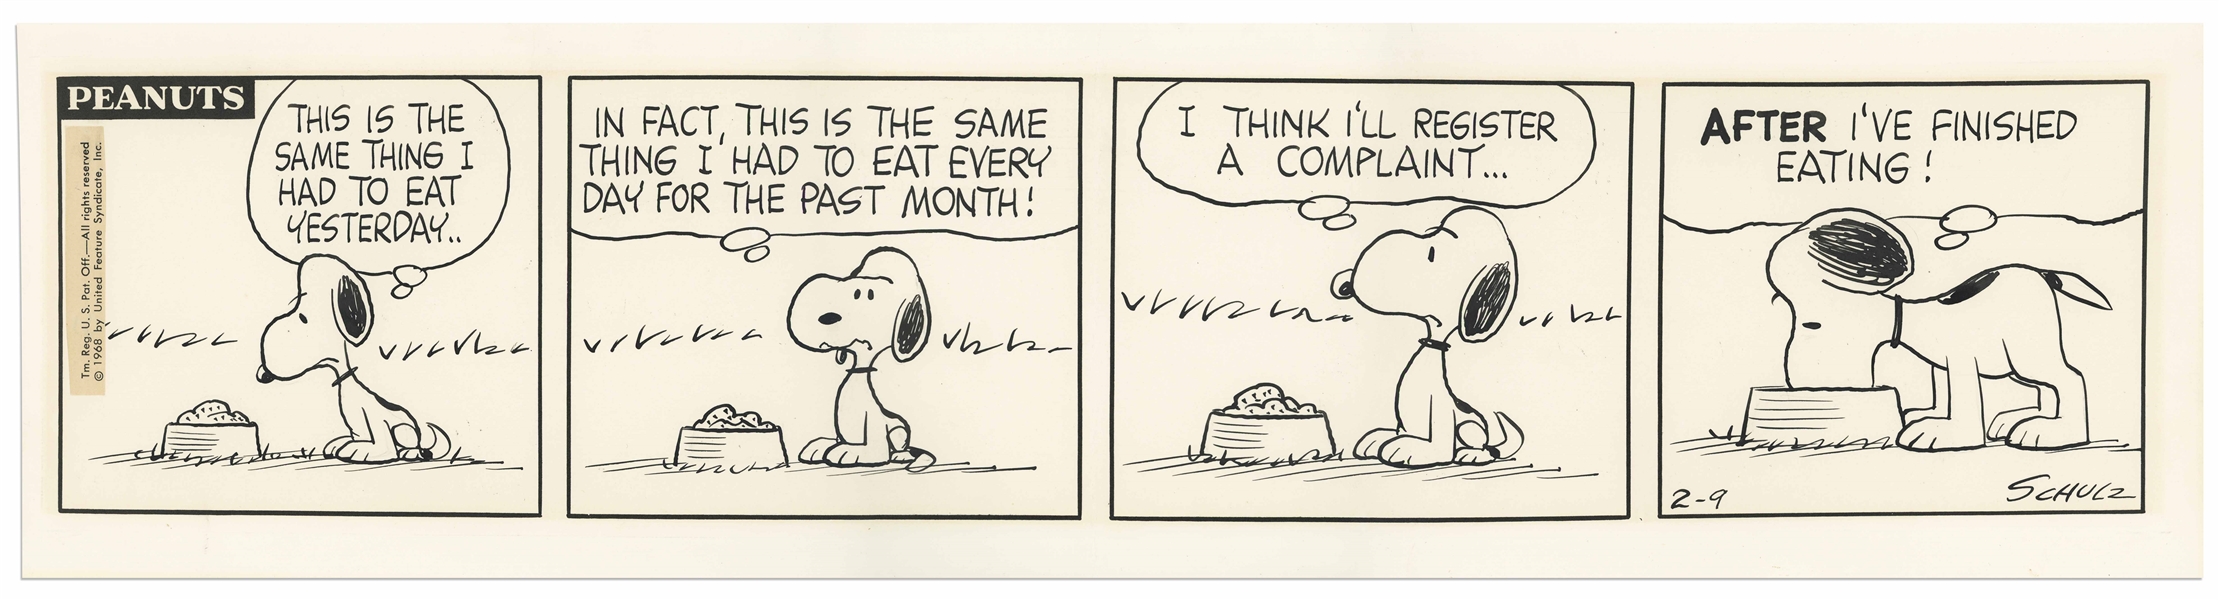 Charles Schulz Hand-Drawn & Inscribed ''Peanuts'' Comic Strip From 1968 Featuring Snoopy